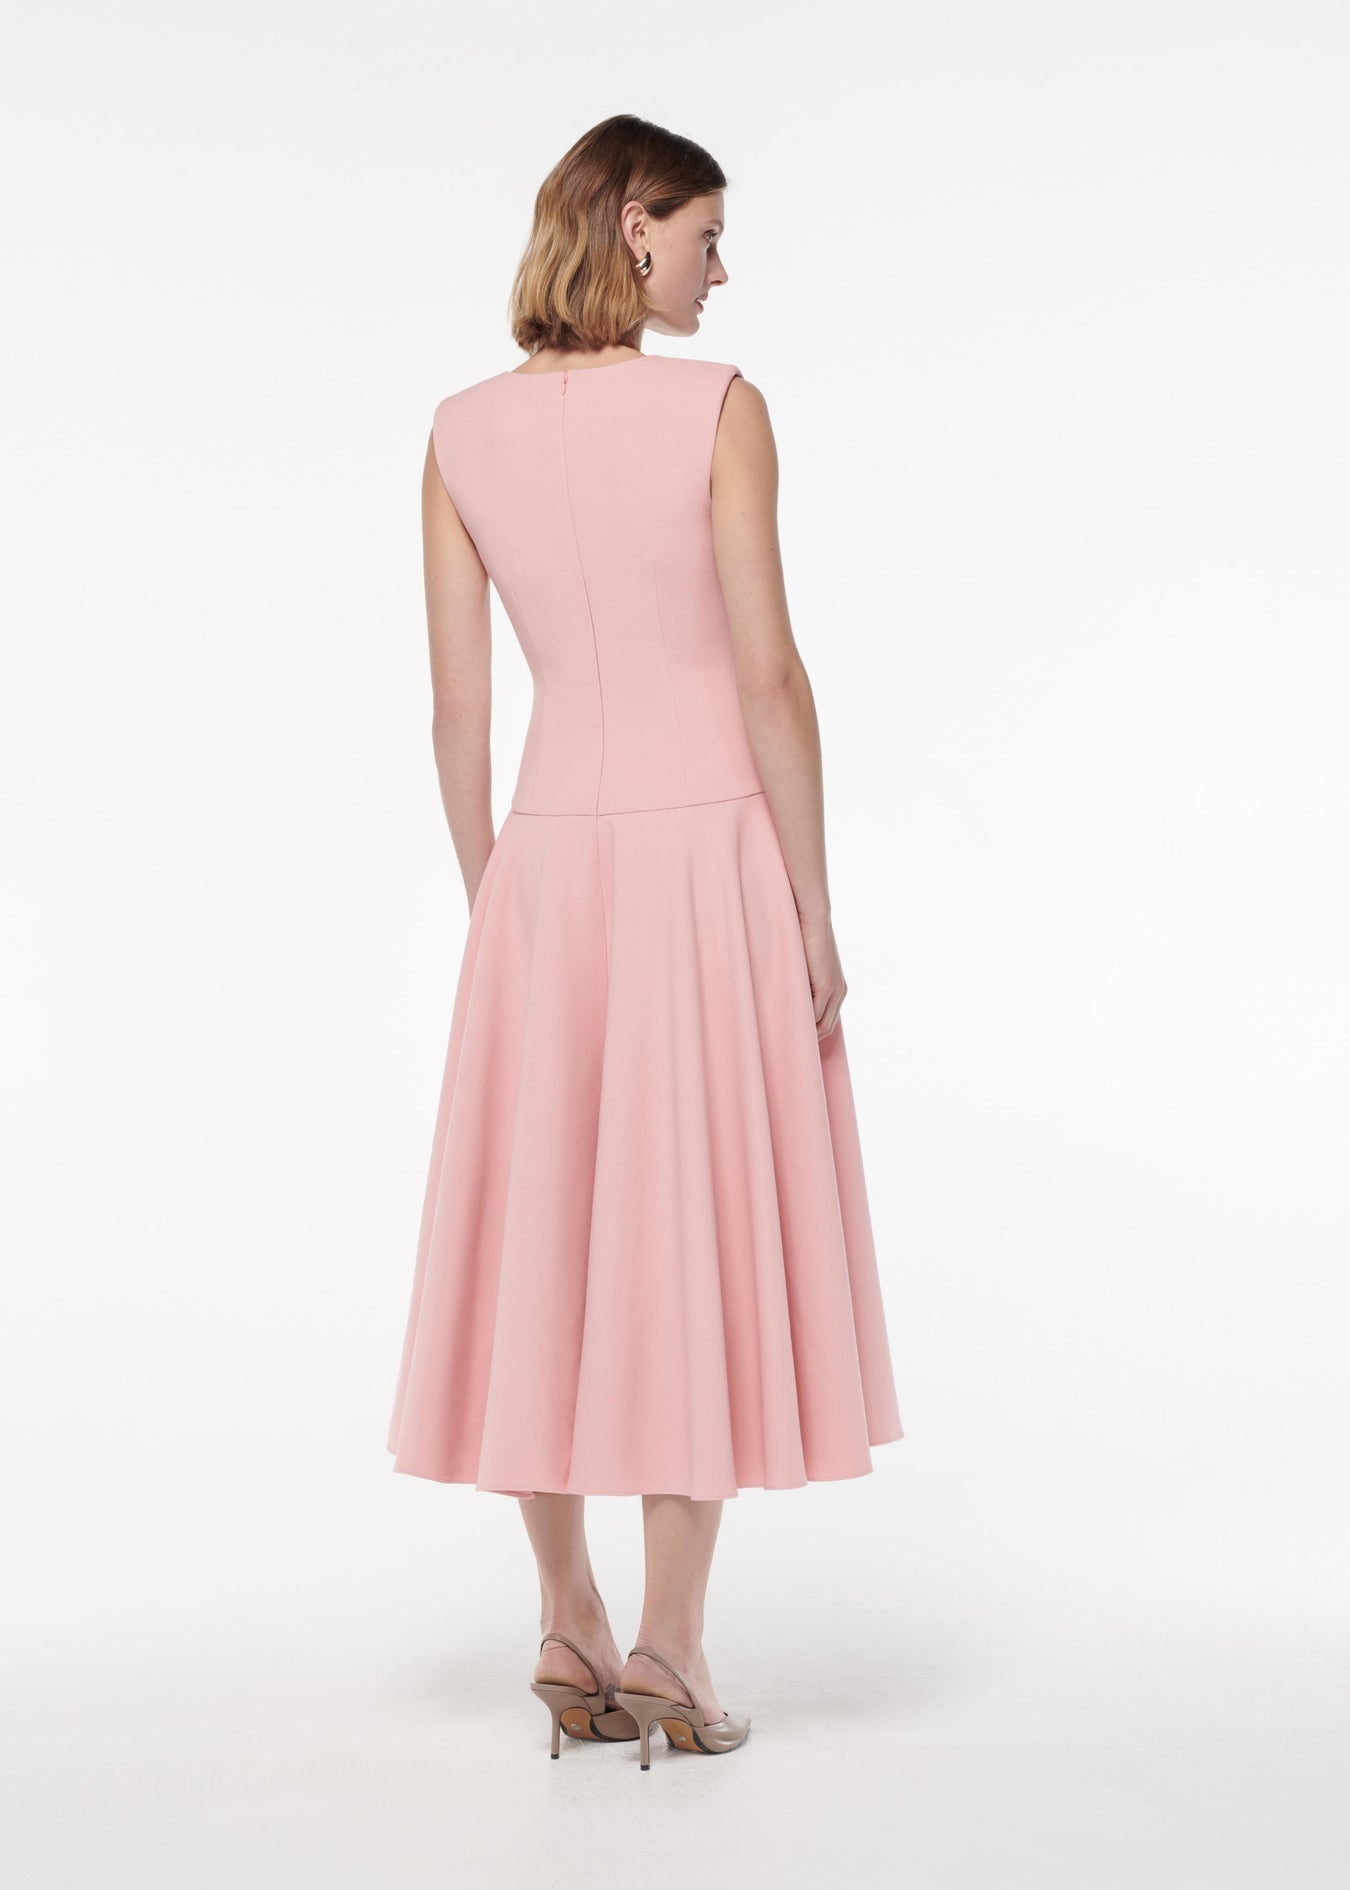 A photograph of a woman wearing a Drop Waist Detail Crepe Midi Dress in Pink